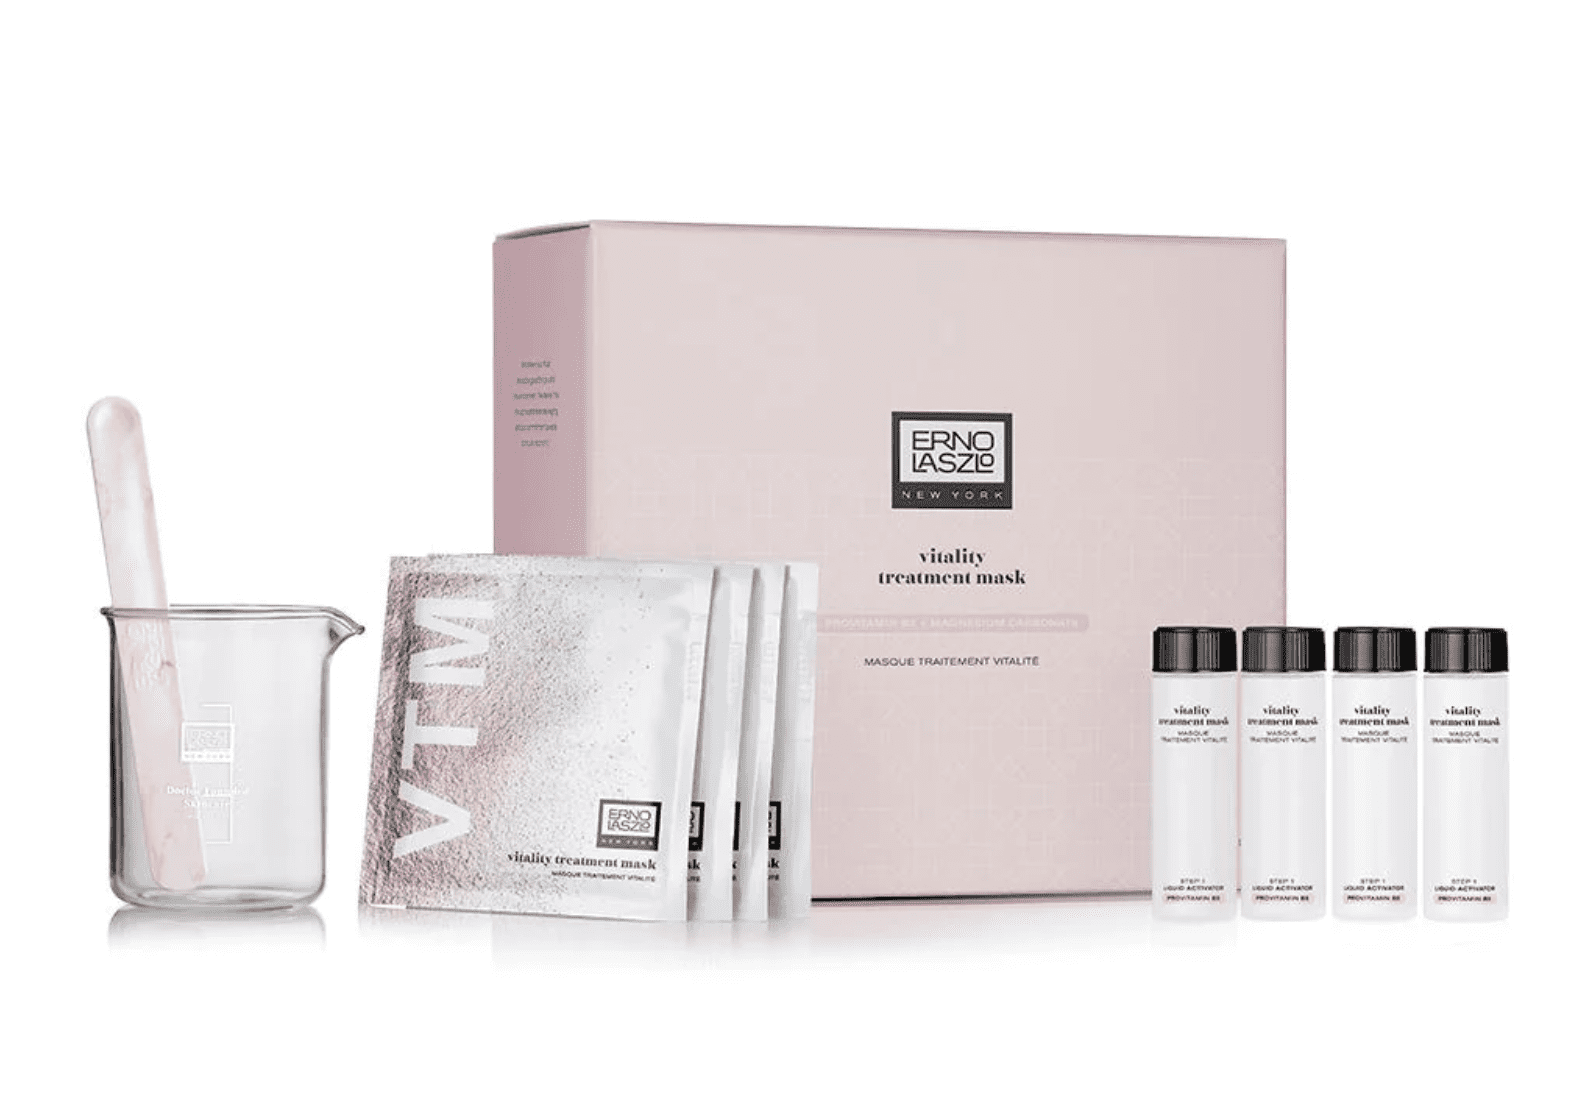 Erno Laszlo: 30% off sitewide + Free Gift